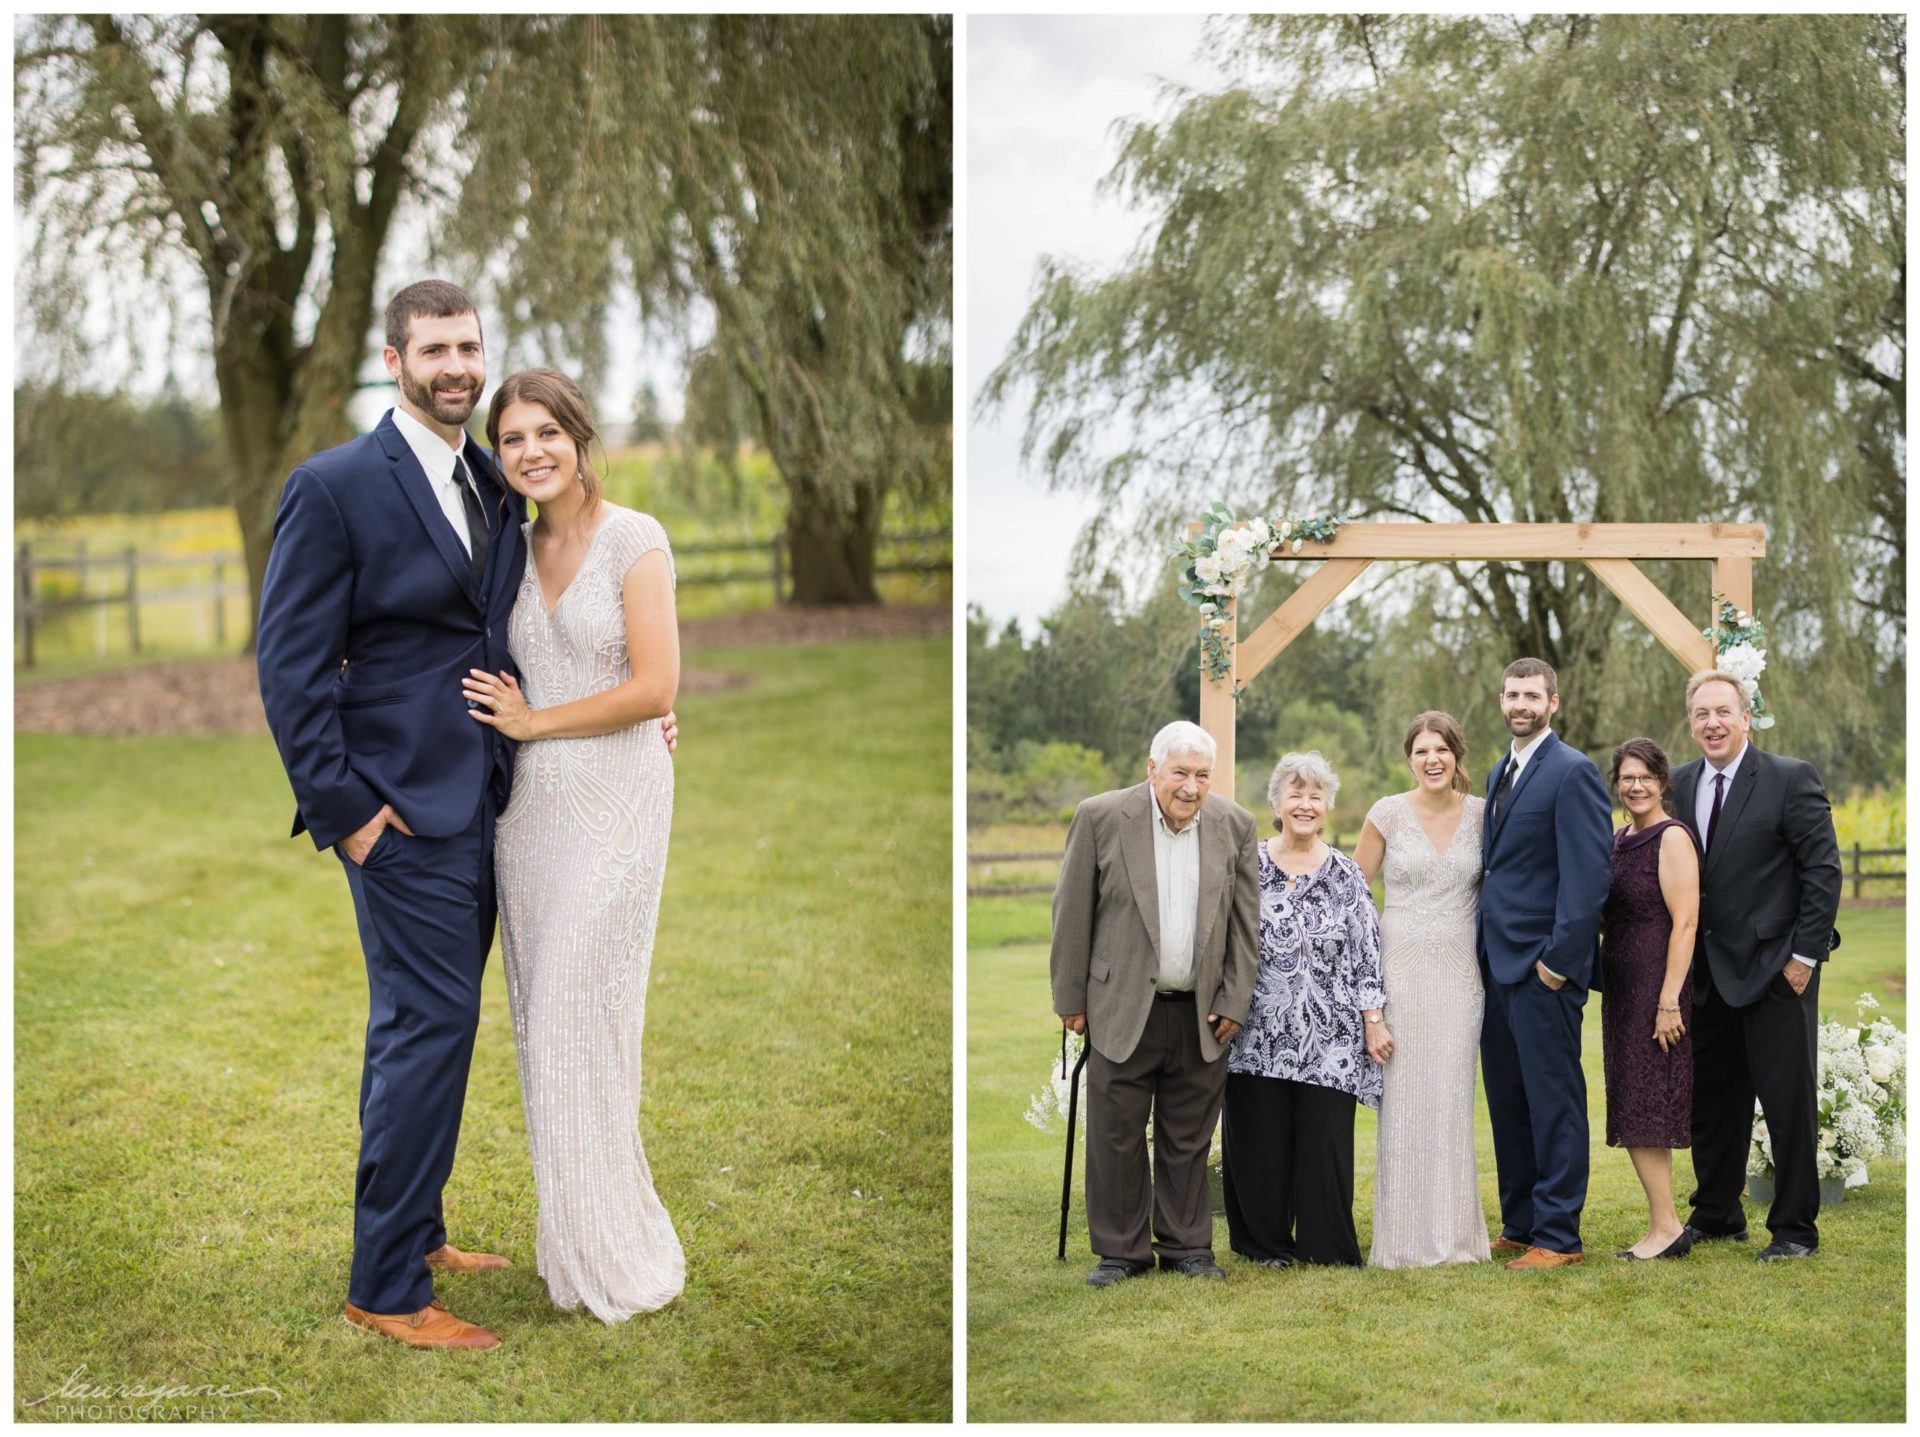 Extended Family Portraits at Wisconsin Wedding